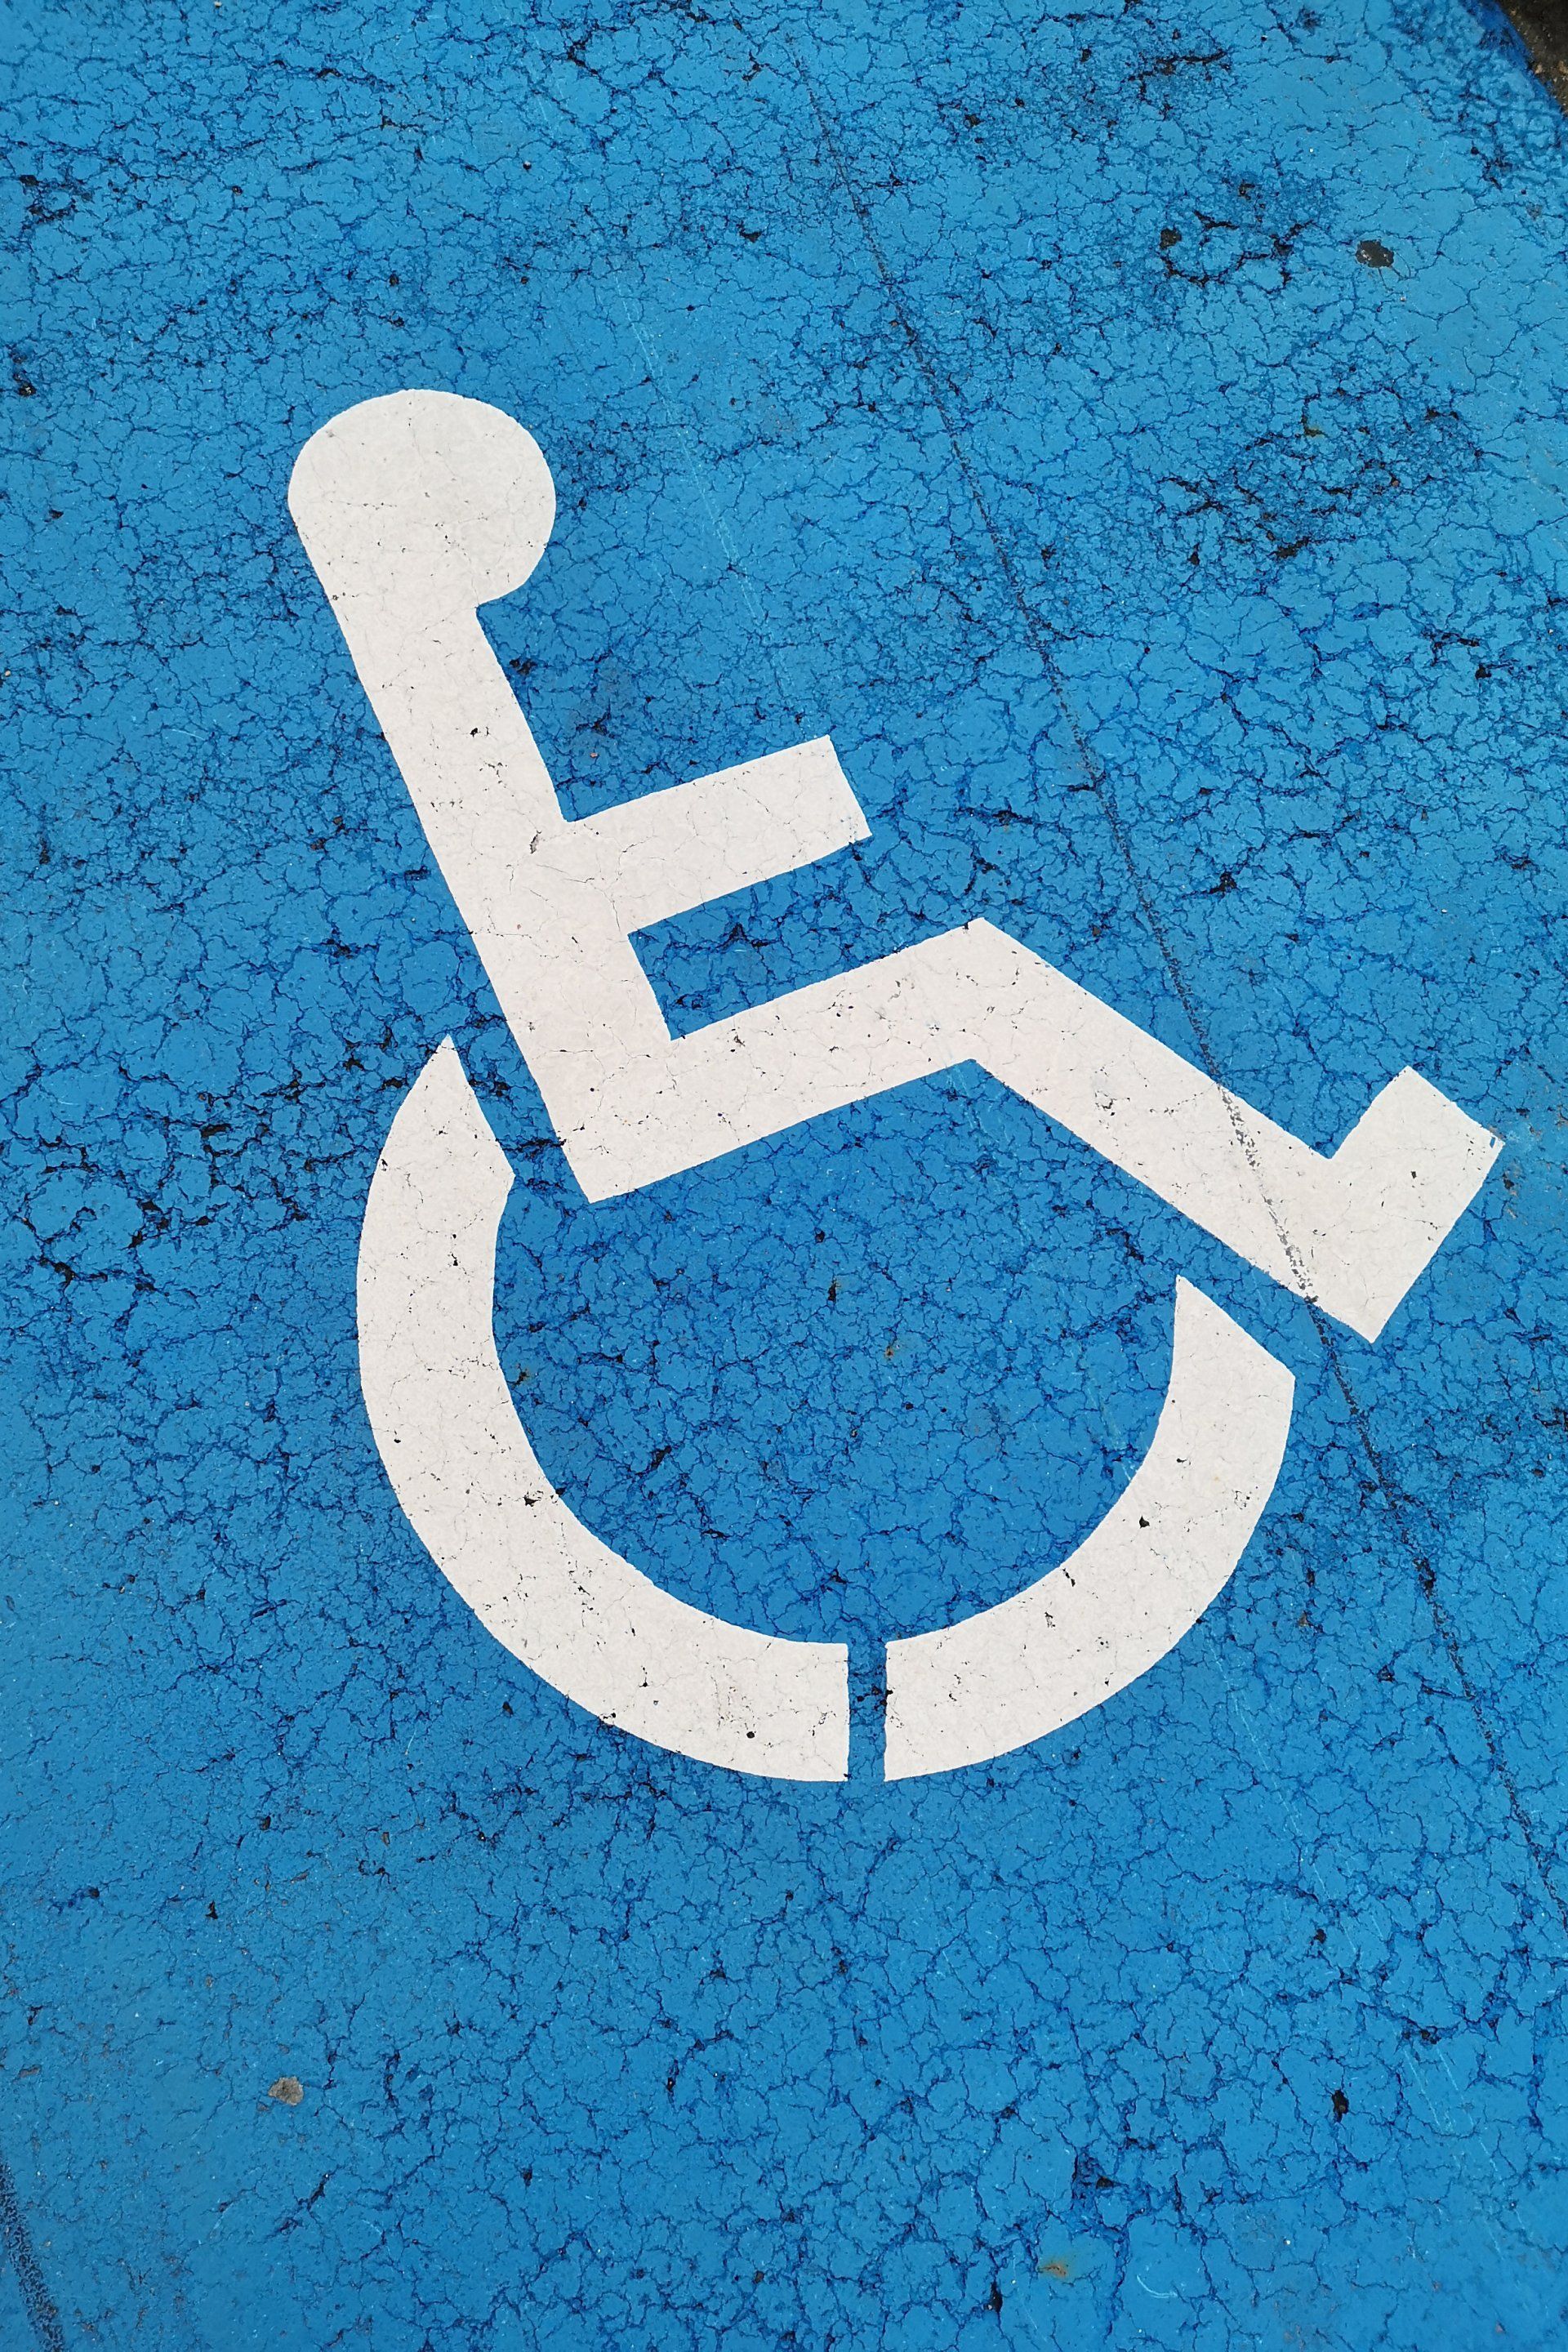 A white handicap sign is painted on a blue surface.